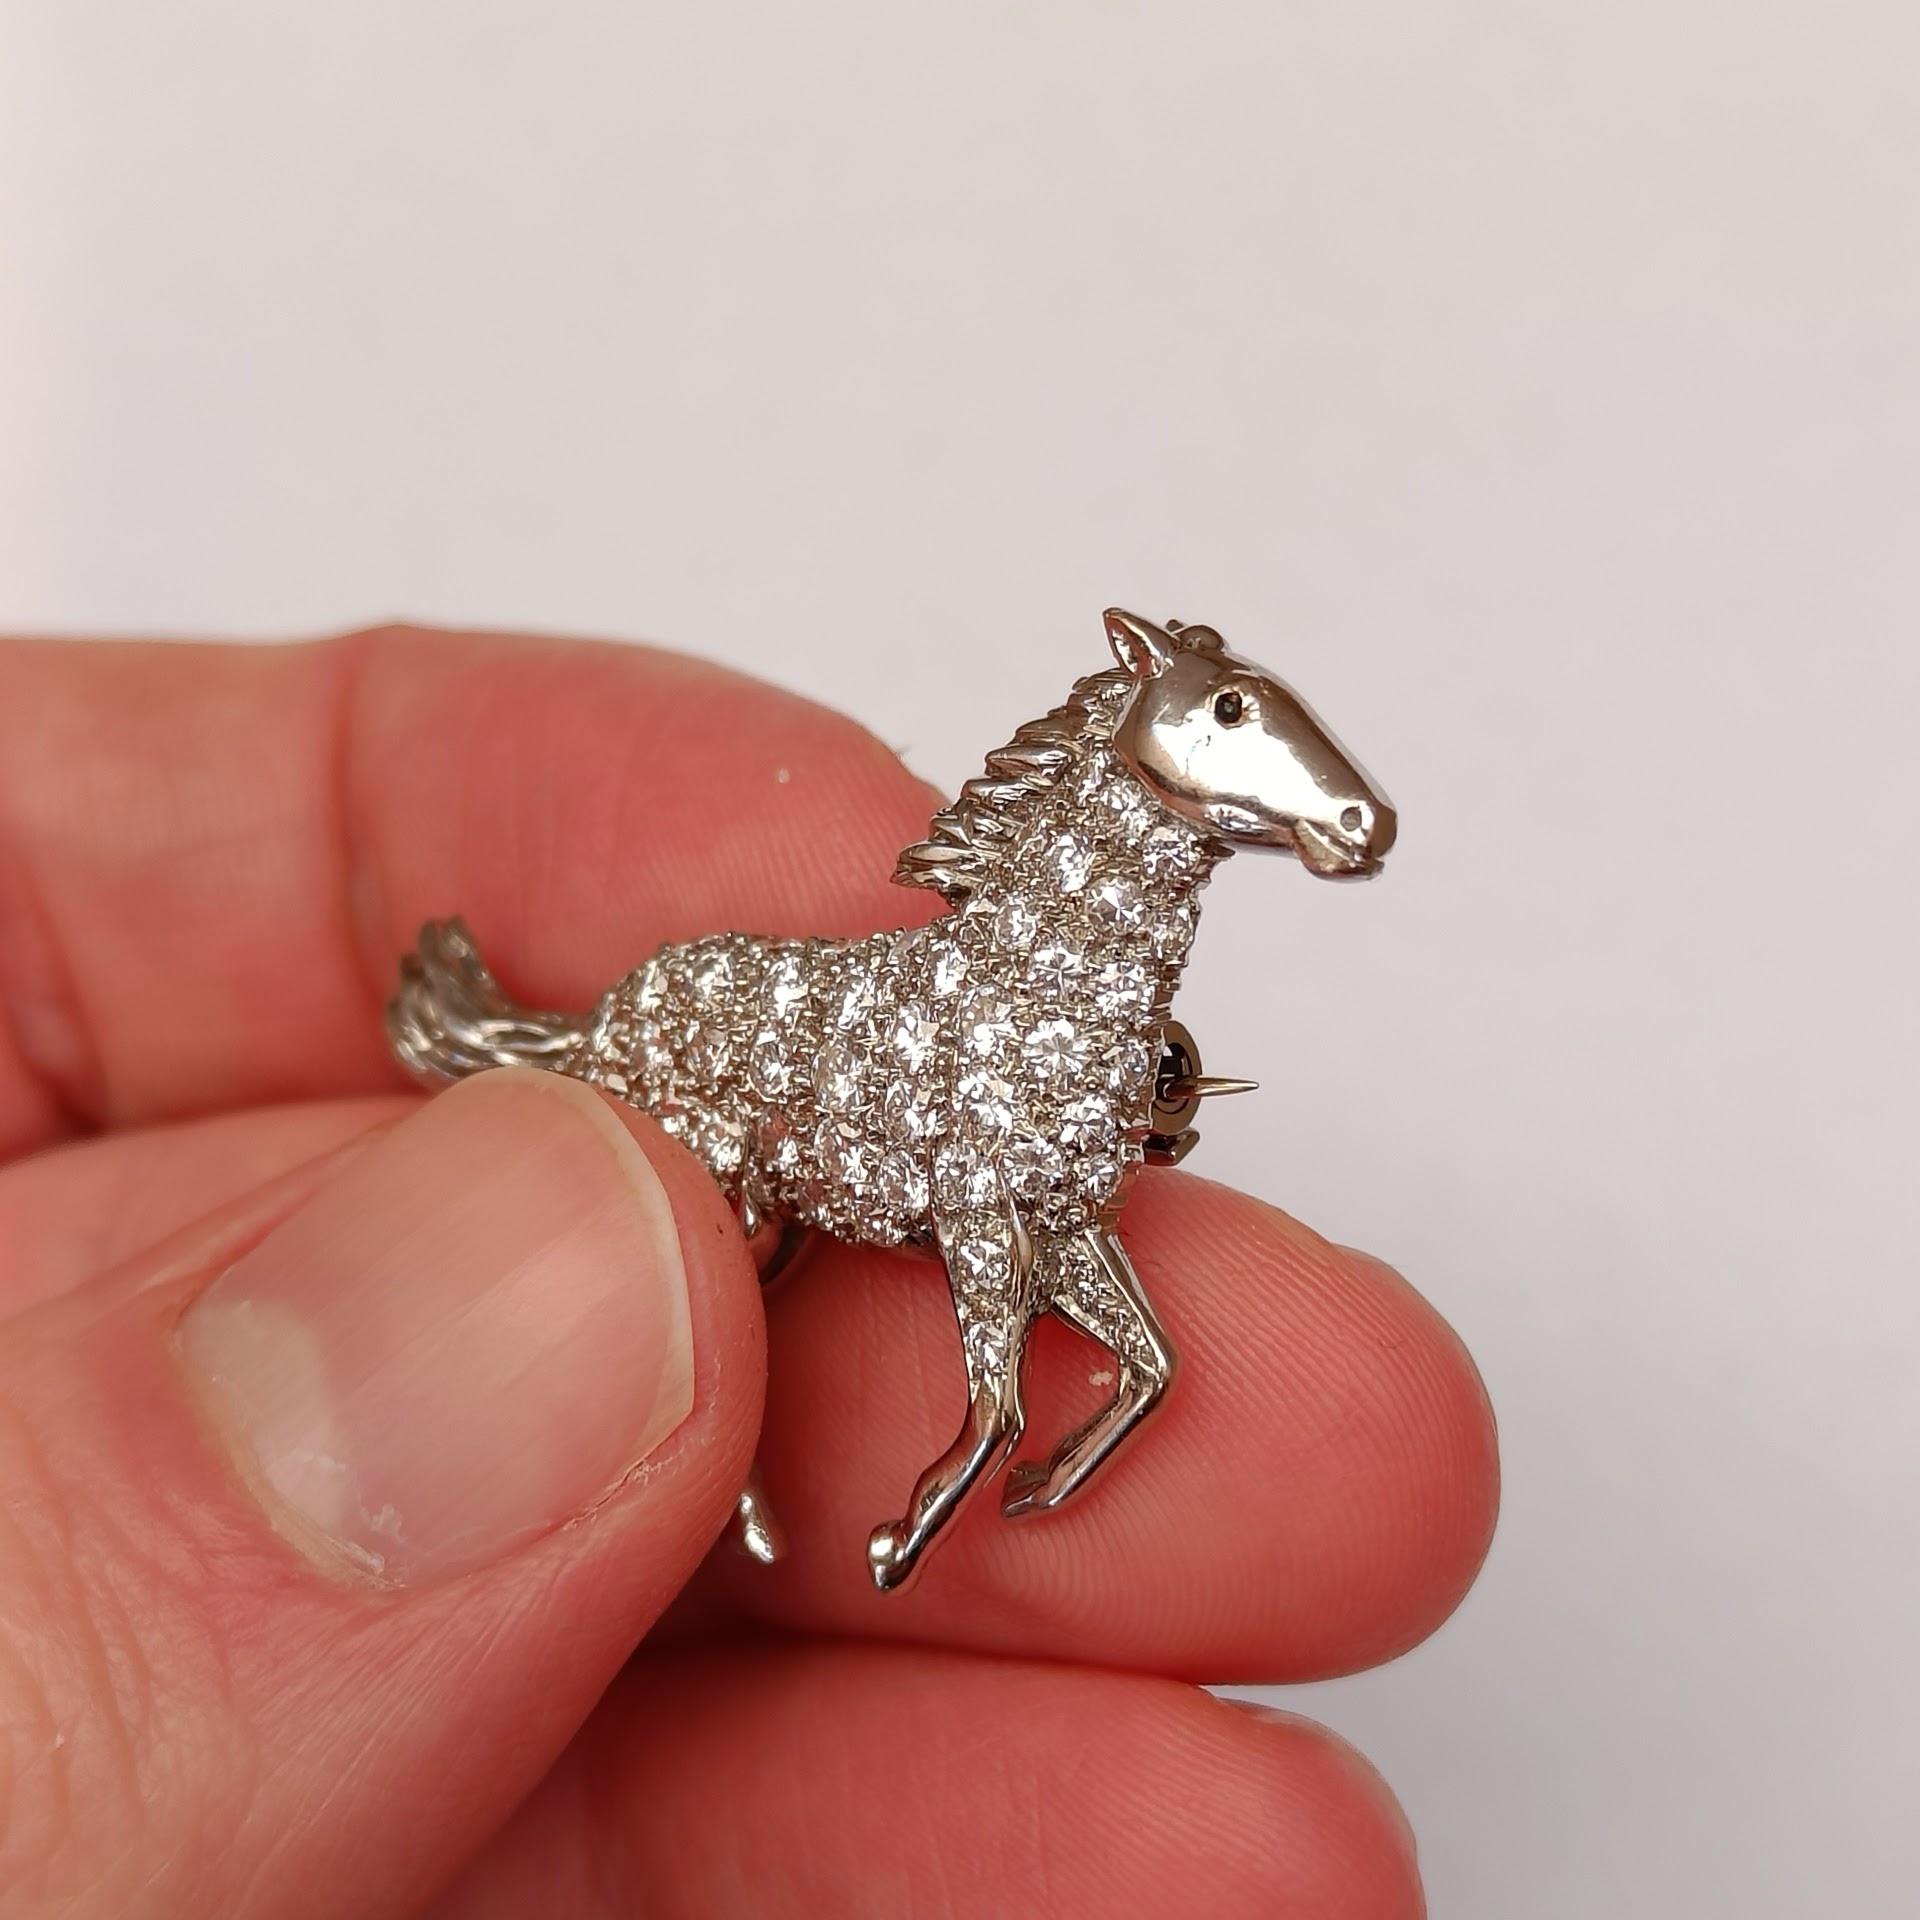 Brilliant Cut 18k Gold Horse Brooch Pin with Diamond Pavé - E. Wolfe & Co, London For Sale